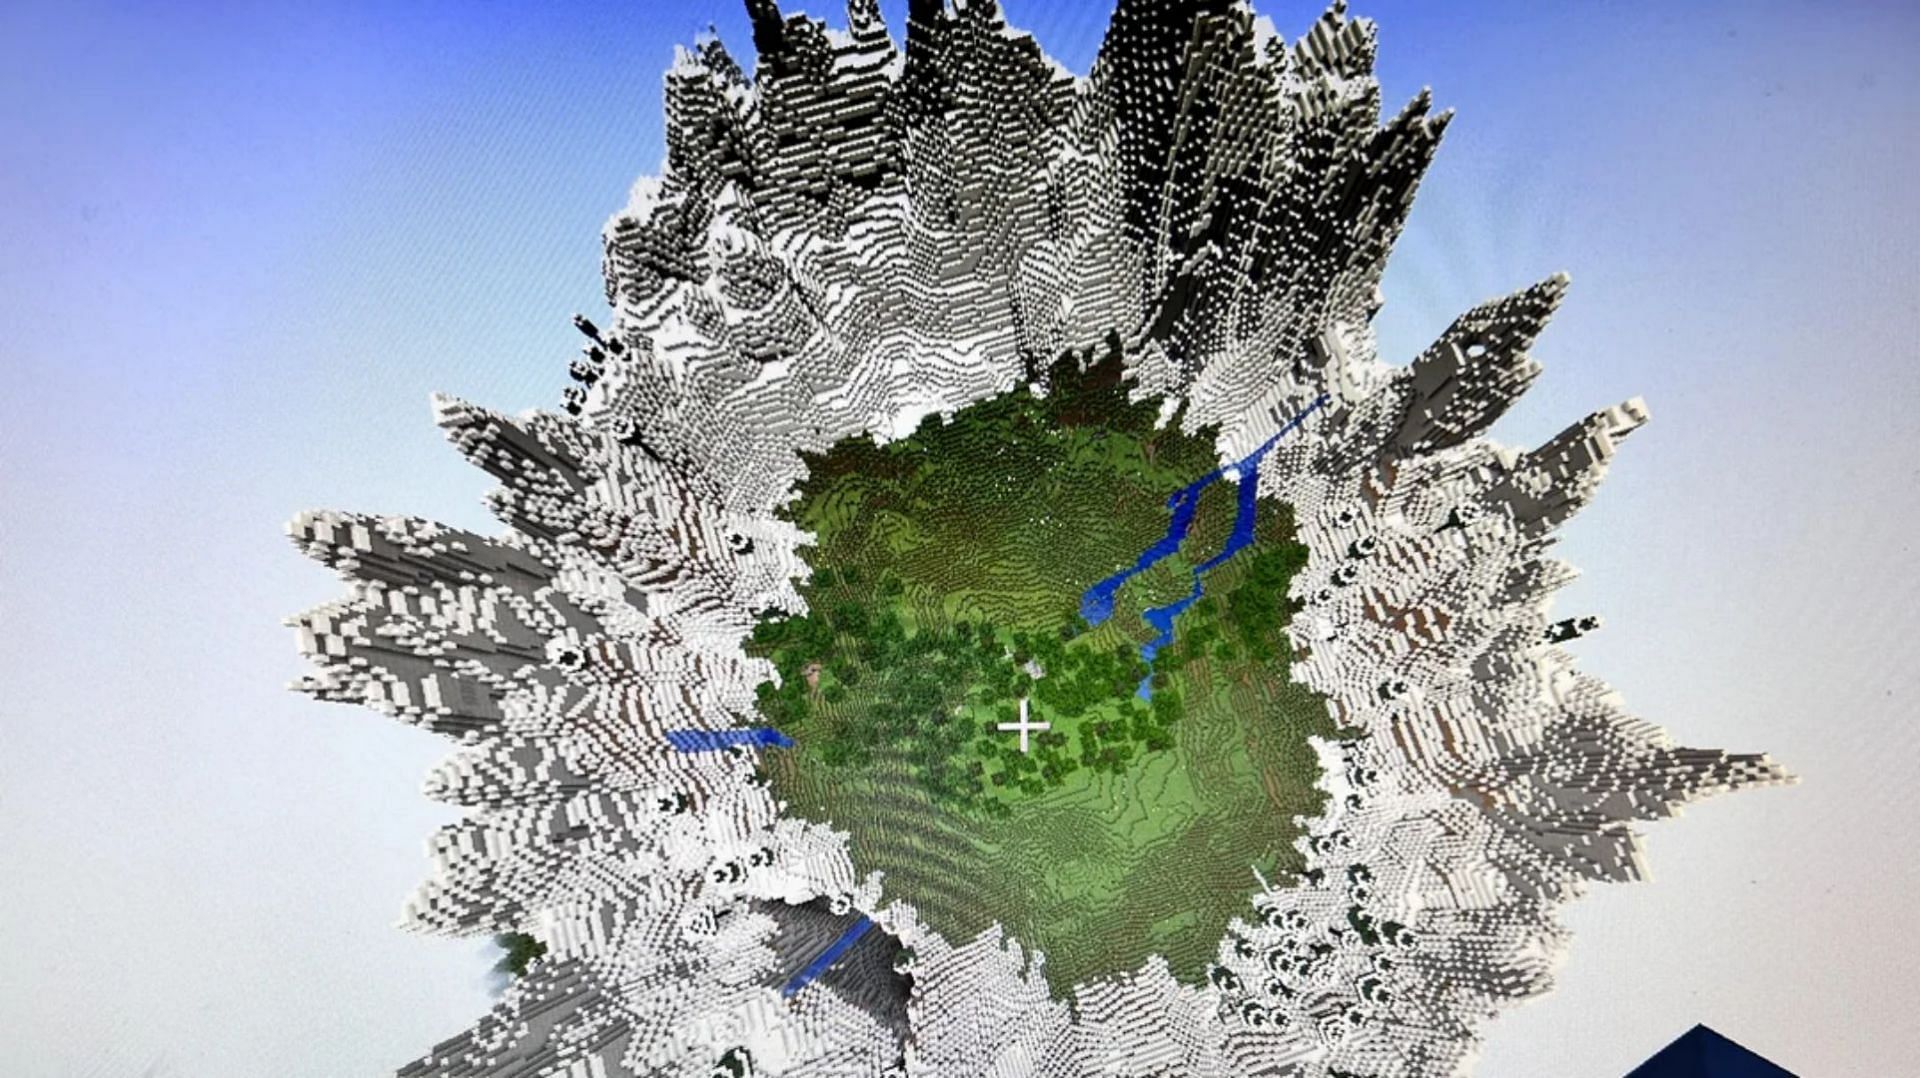 Minecraft Redditor finds stunning forest and mountain spawn on a random seed (Image via Reddit/u/Shibby_A)